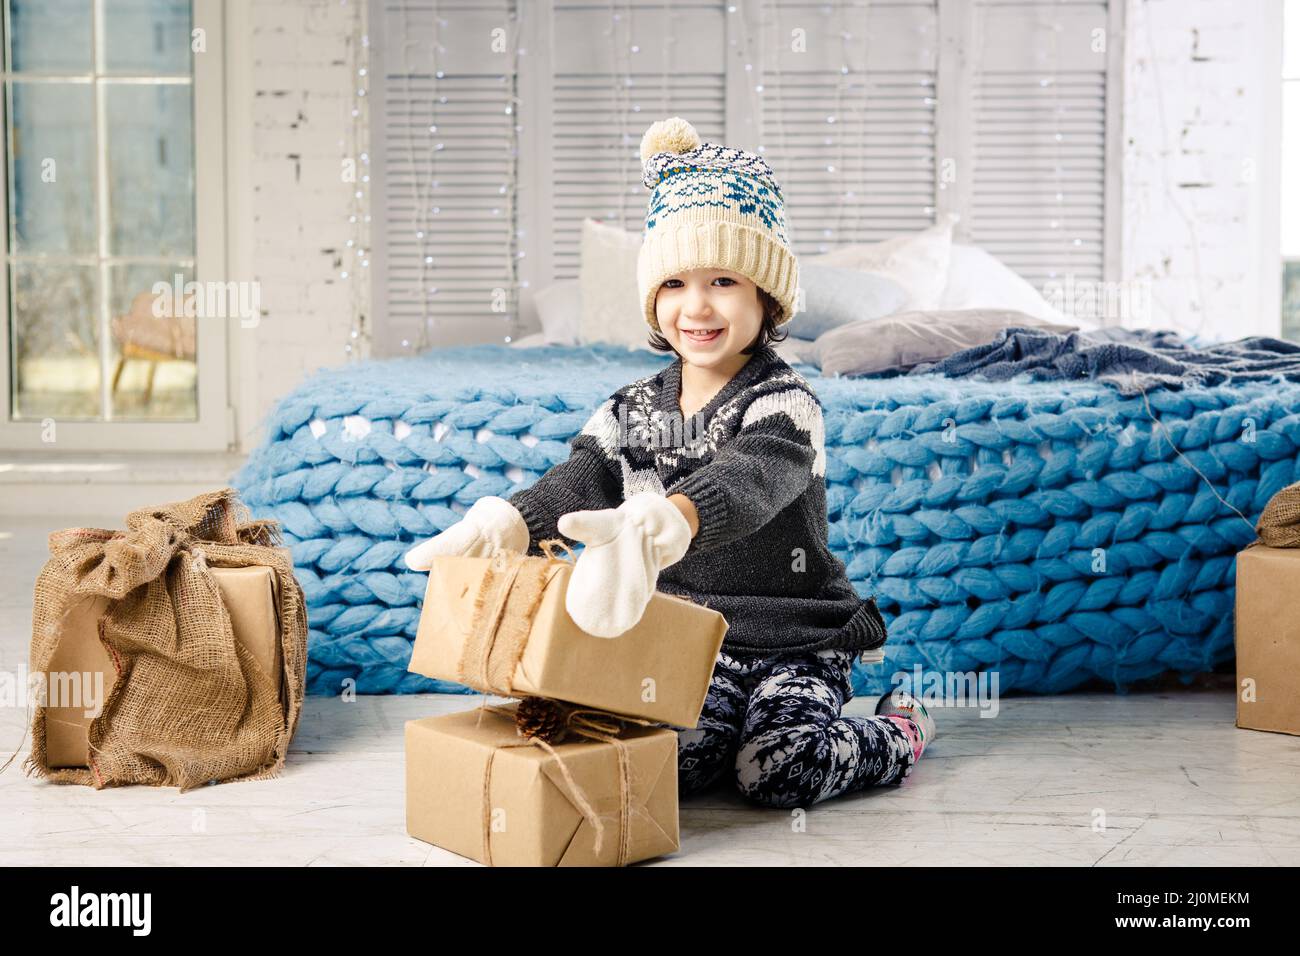 Little baby girl is folding up a mountain of gift boxes at home, near the bed. The interior is decorated with Christmas decor. D Stock Photo